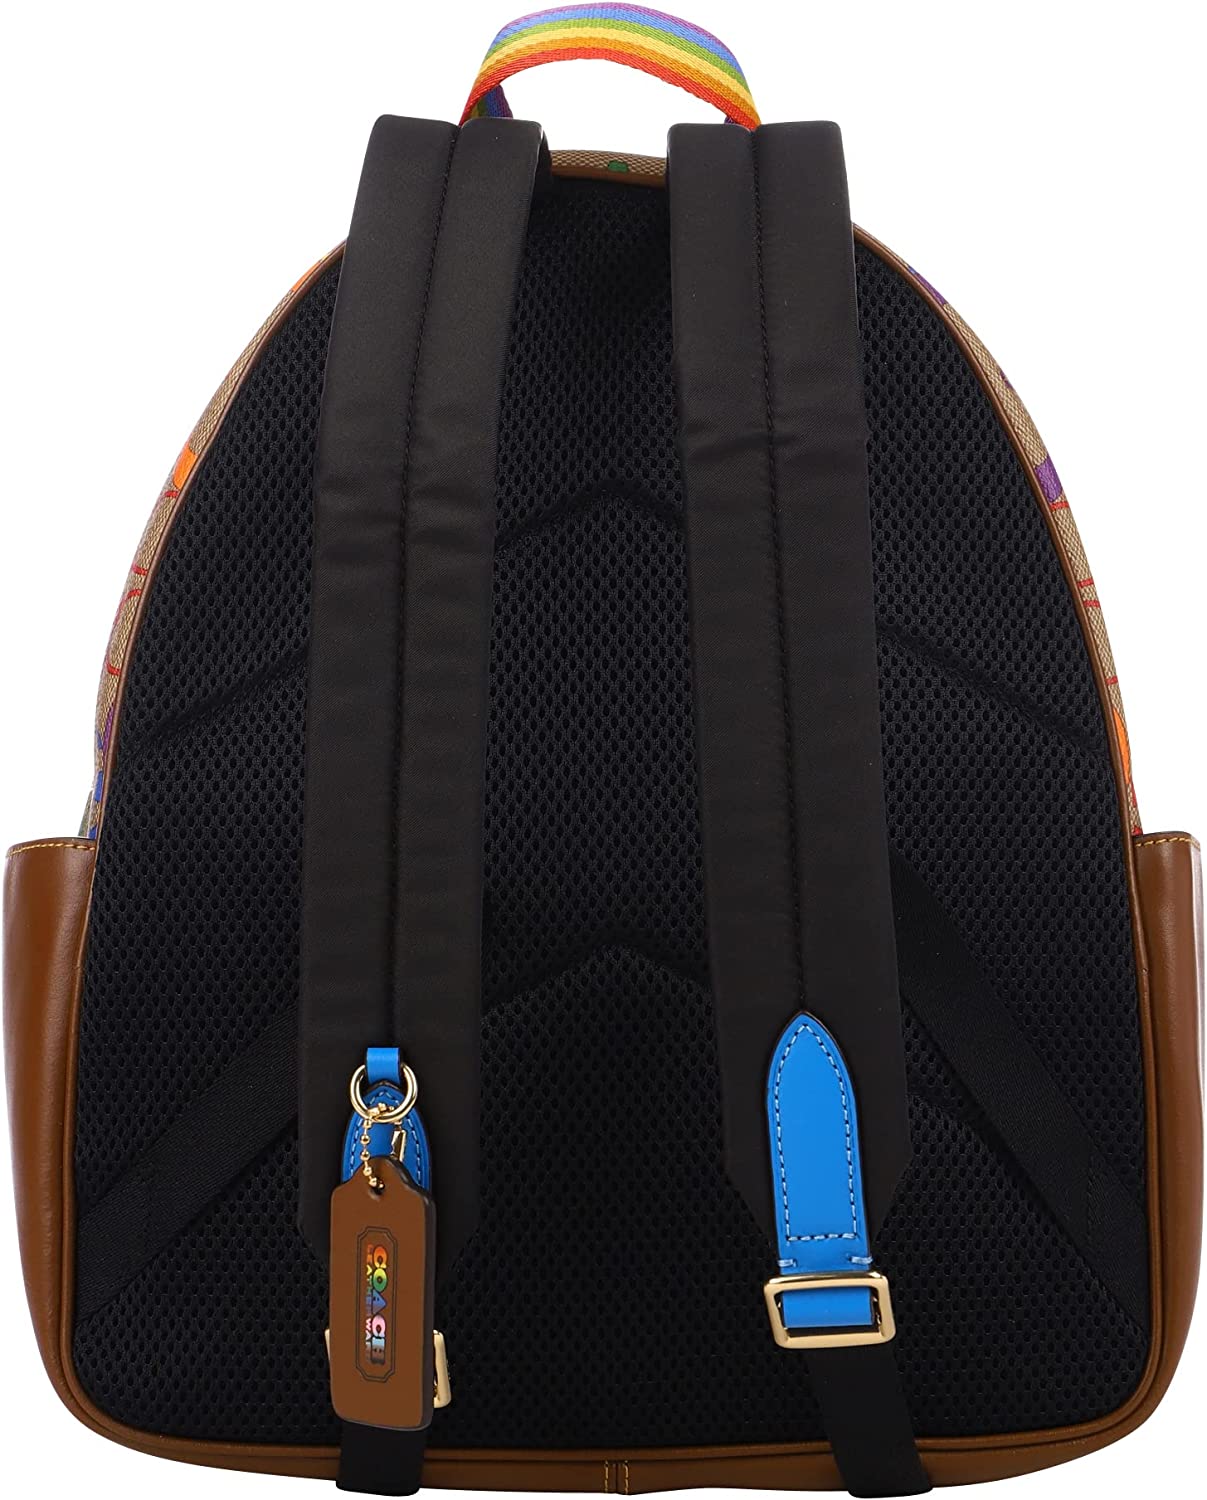 BALO NỮ COACH COURT BACKPACK IN RAINBOW SIGNATURE CANVAS CA140 1